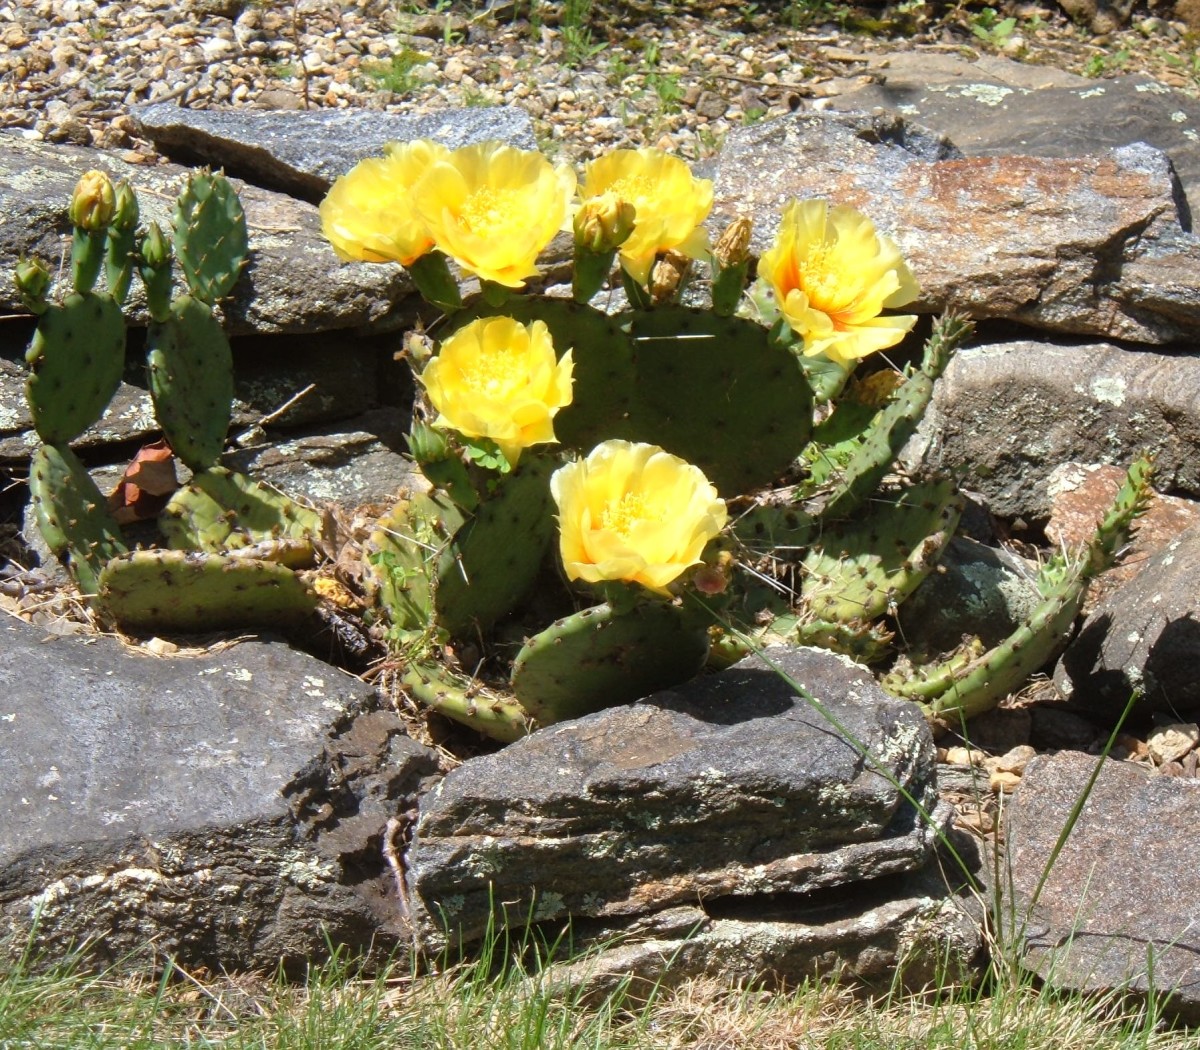 This blooming cactus is thriving in our New England rock garden.